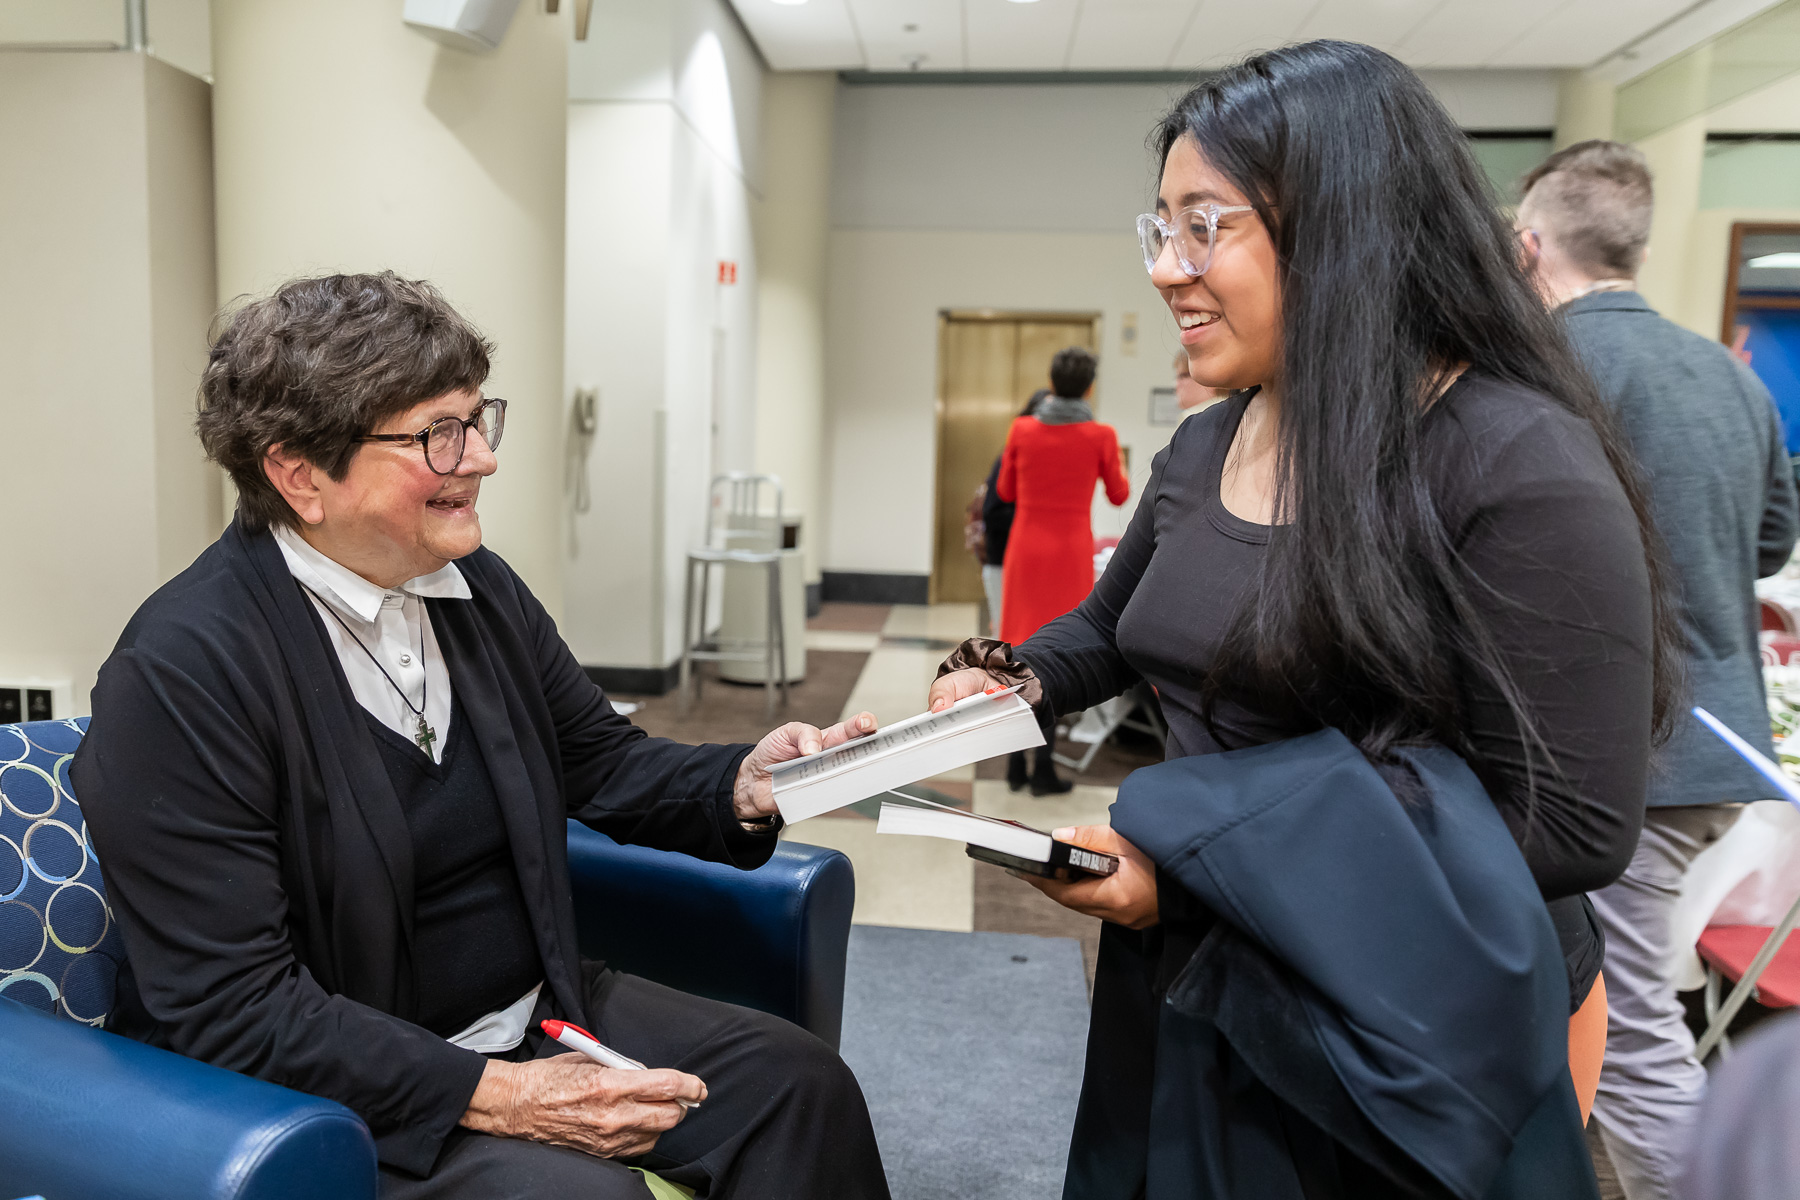 Sister Helen Prejean, C.S.J., chats with a student.